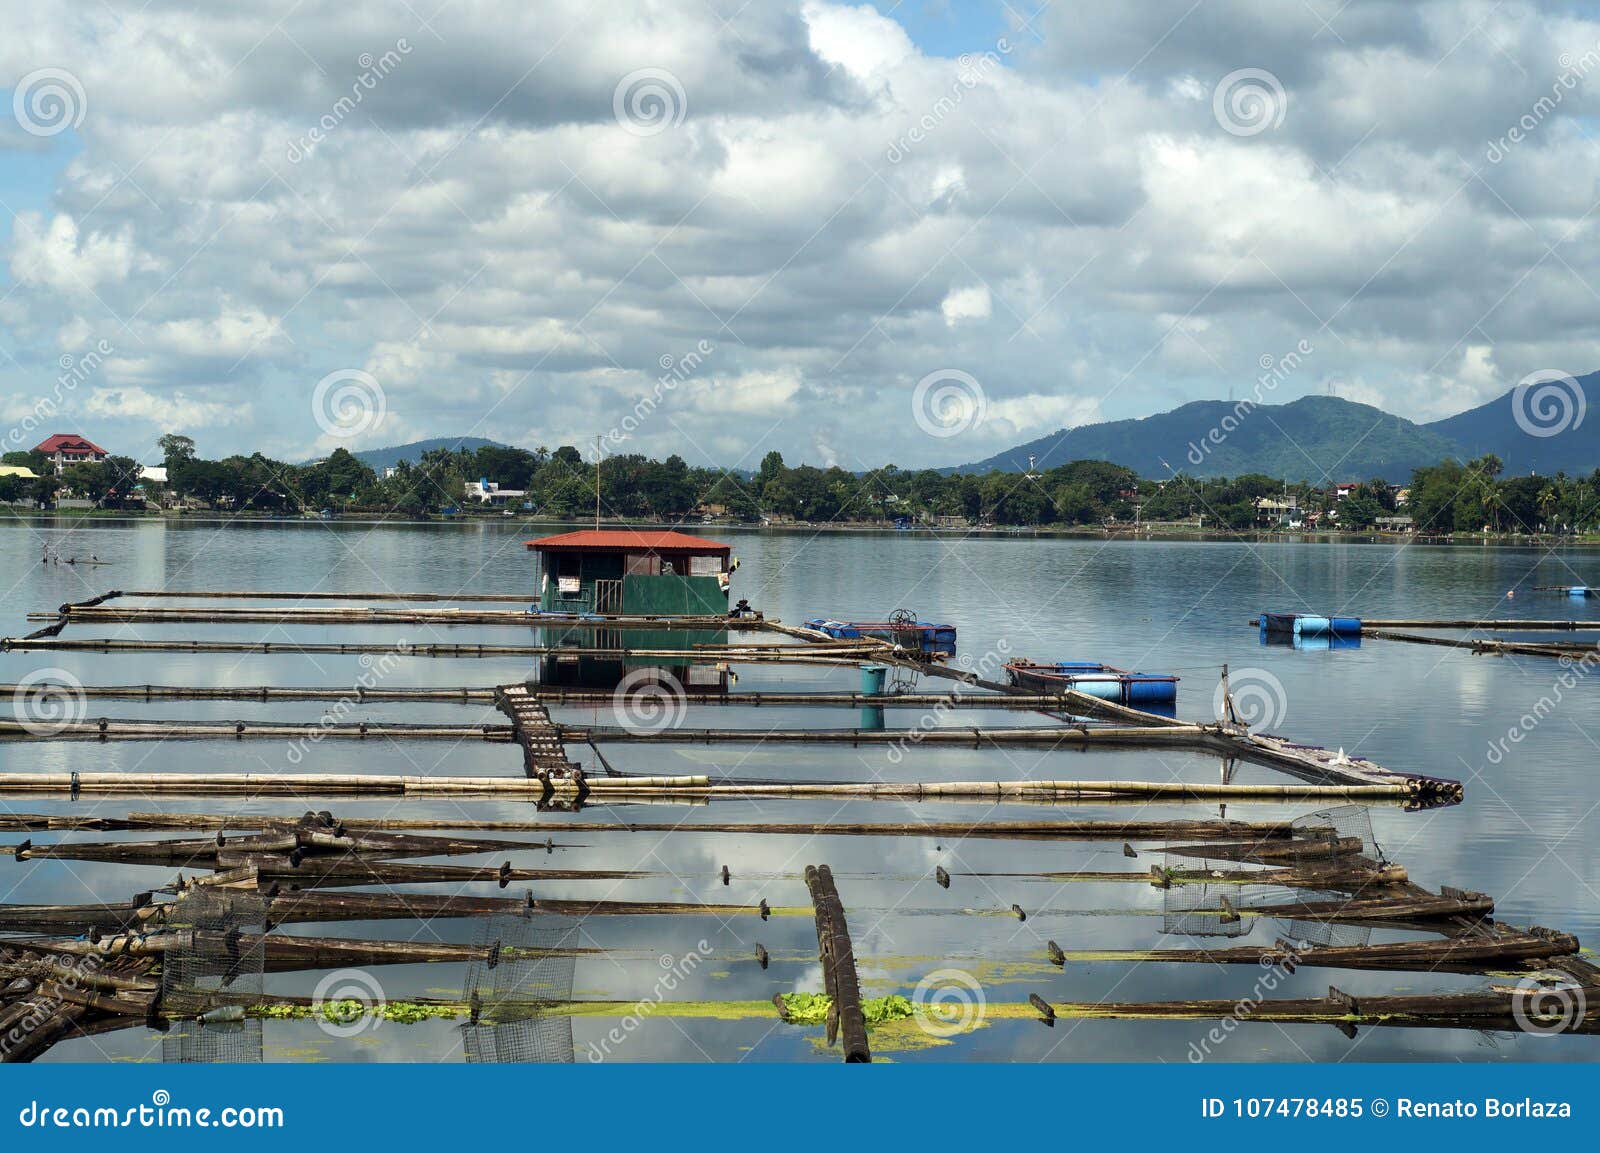 Bamboo Hut Built in the Middle of the Lake Stock Image - Image of